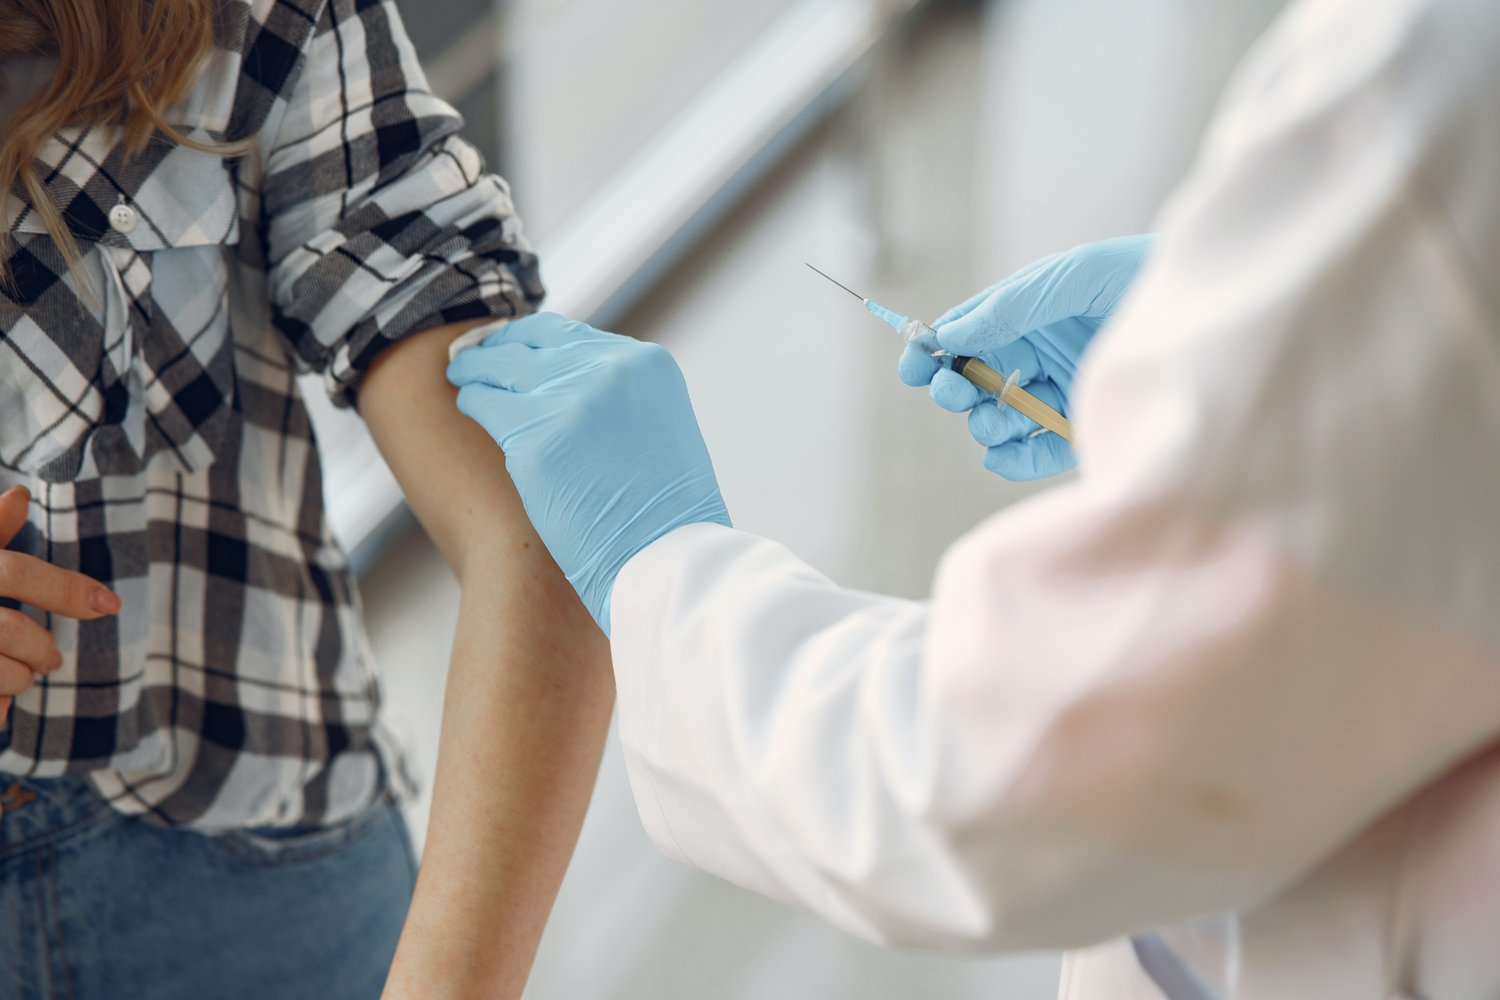 A total of about 3.7 million Texans are fully vaccinated, which comes out to roughly 12% of the state’s population. The state is expecting to provide 1 million more doses of the vaccine to Texans this week.